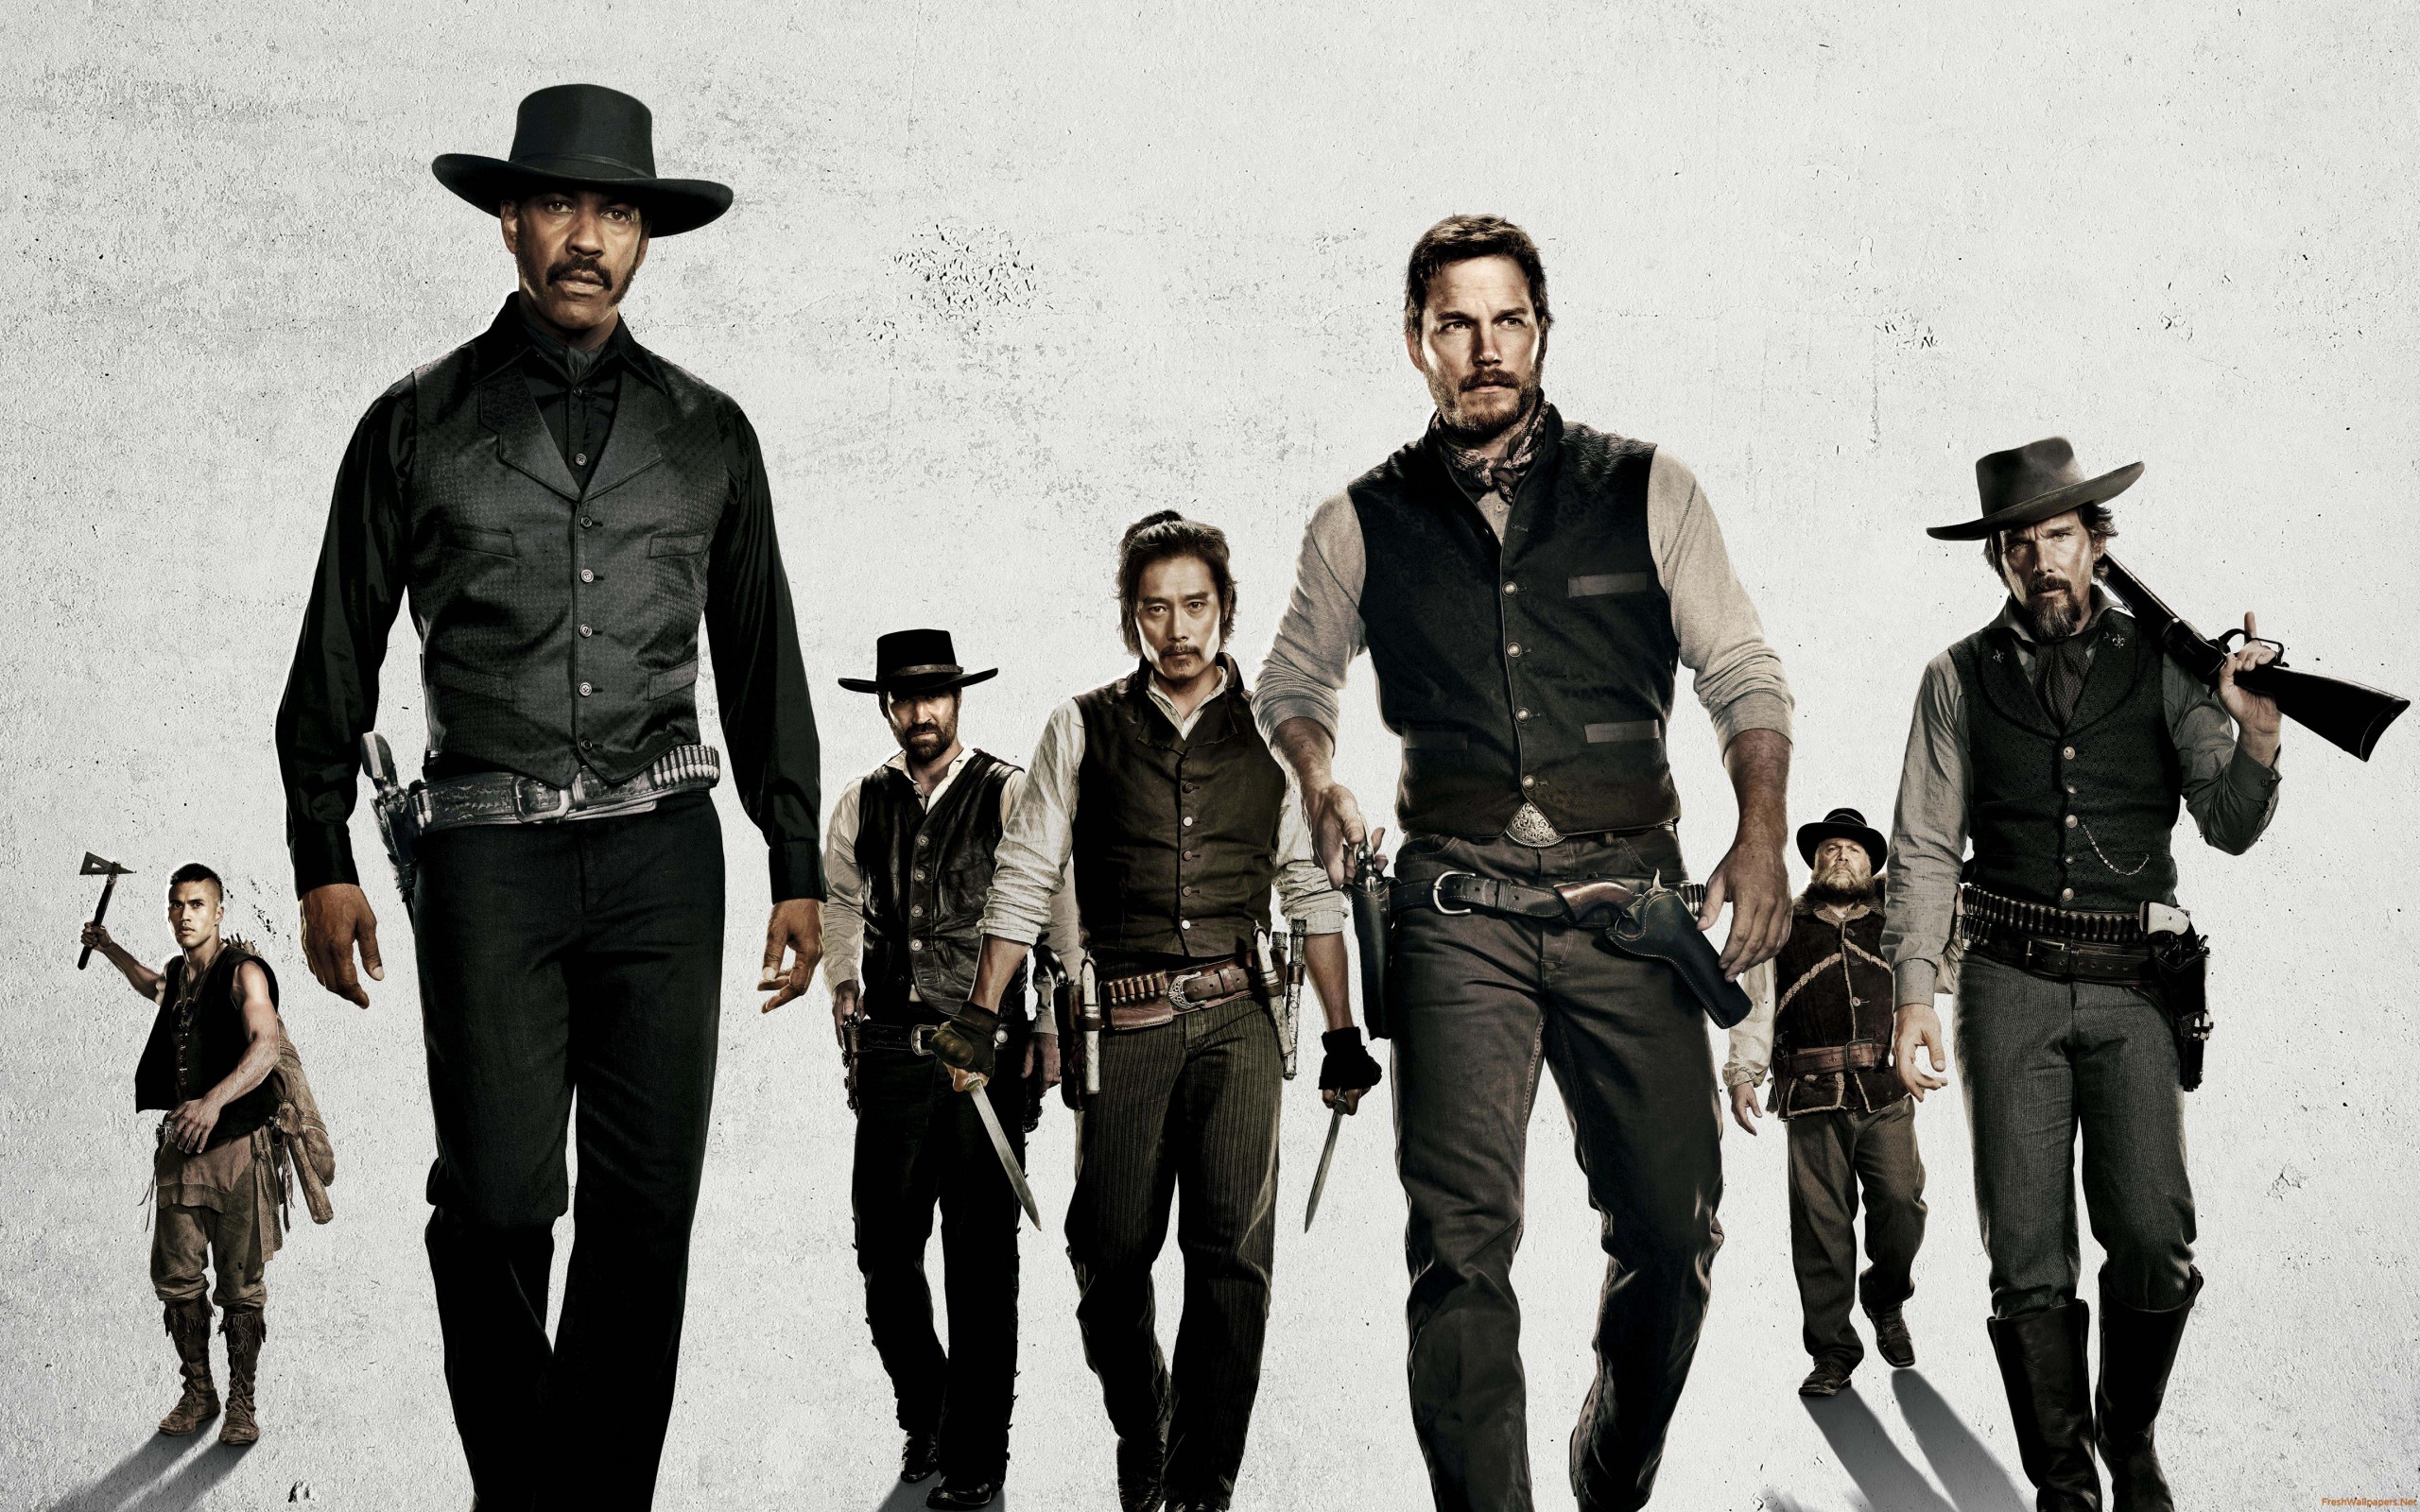 Amazing The Magnificent Seven (2016) Pictures & Backgrounds